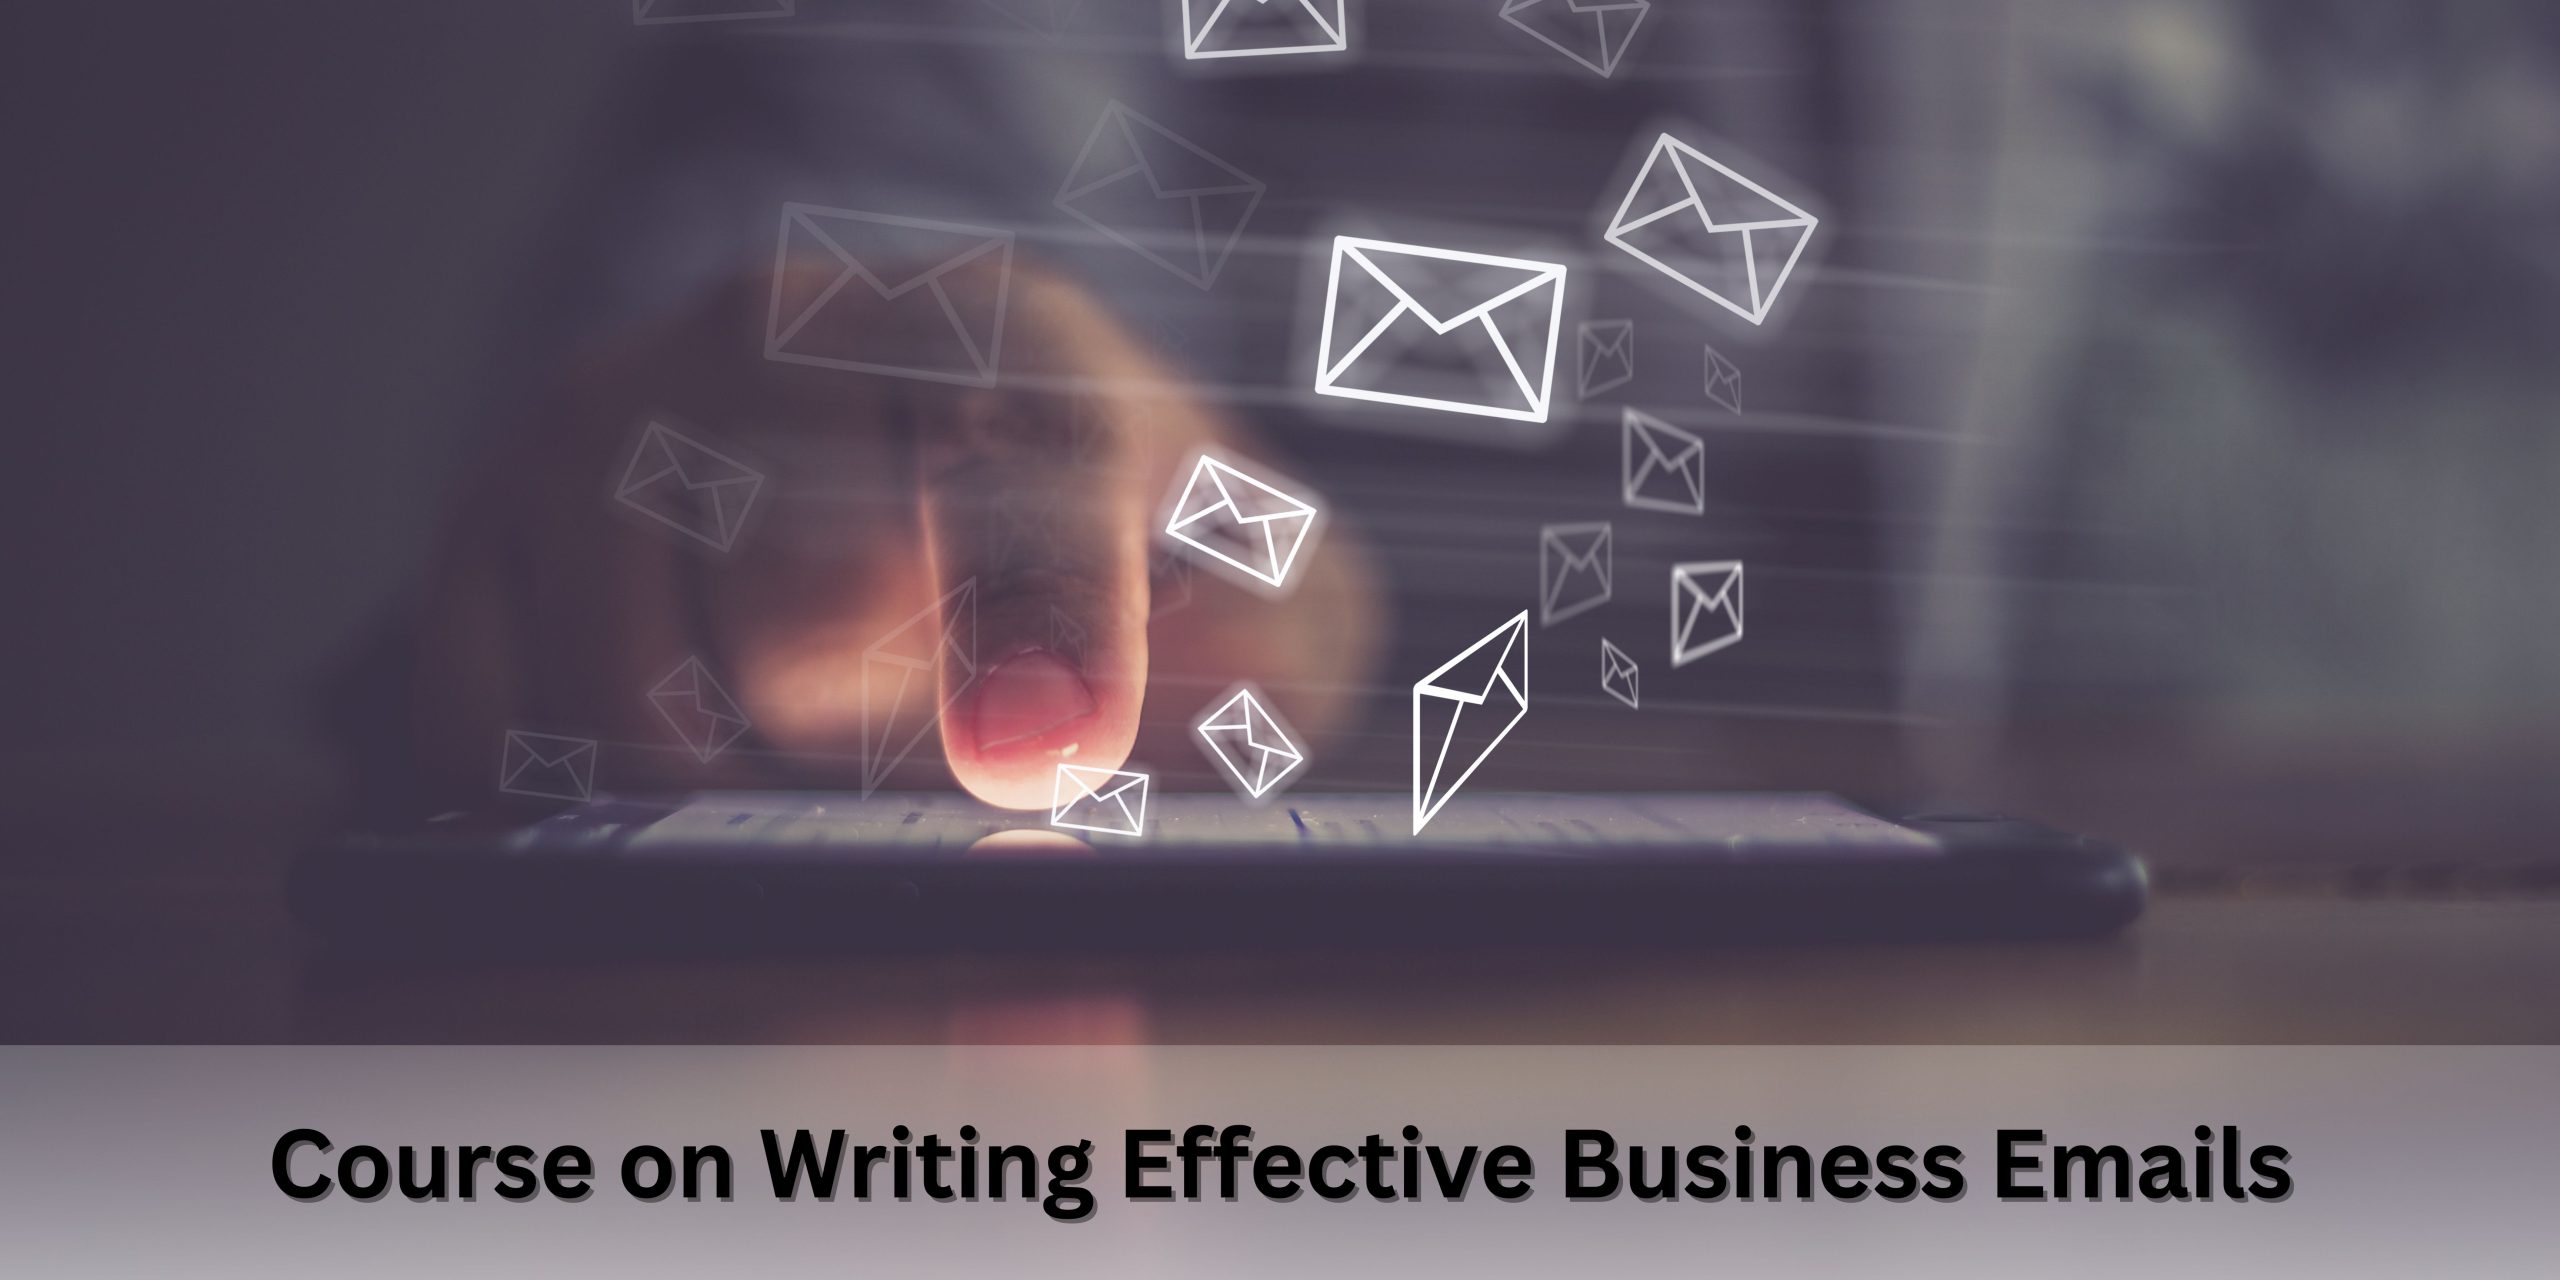 Advanced Professional Course on Writing Effective Business Emails